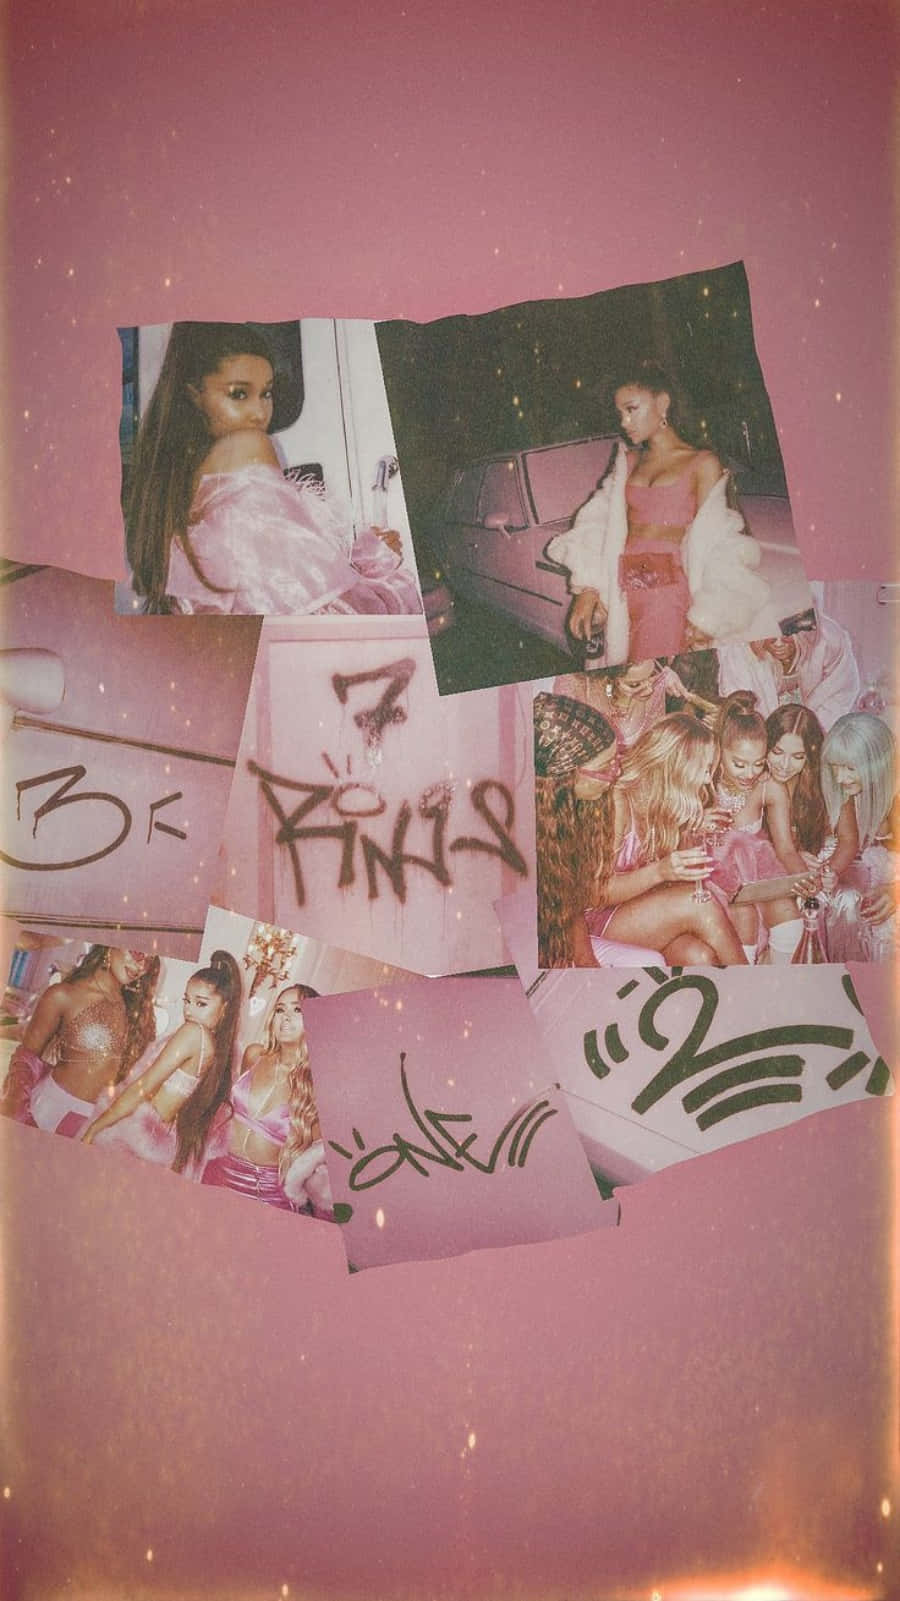 Ariana Grande with her 7 Rings Wallpaper